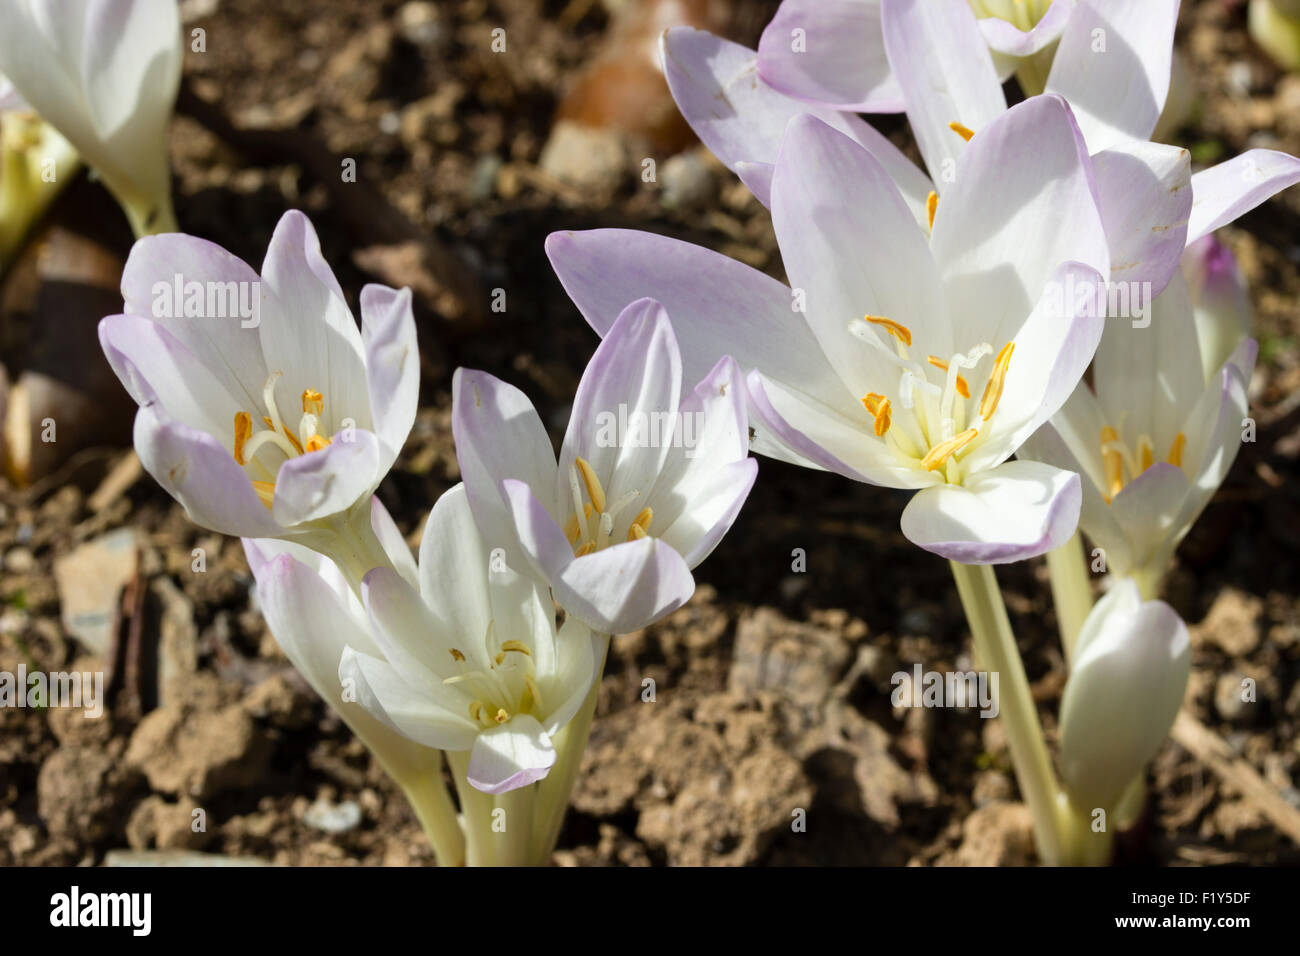 Blush pink form of the autumn blooming meadow saffron, Colchicum autumnale Stock Photo